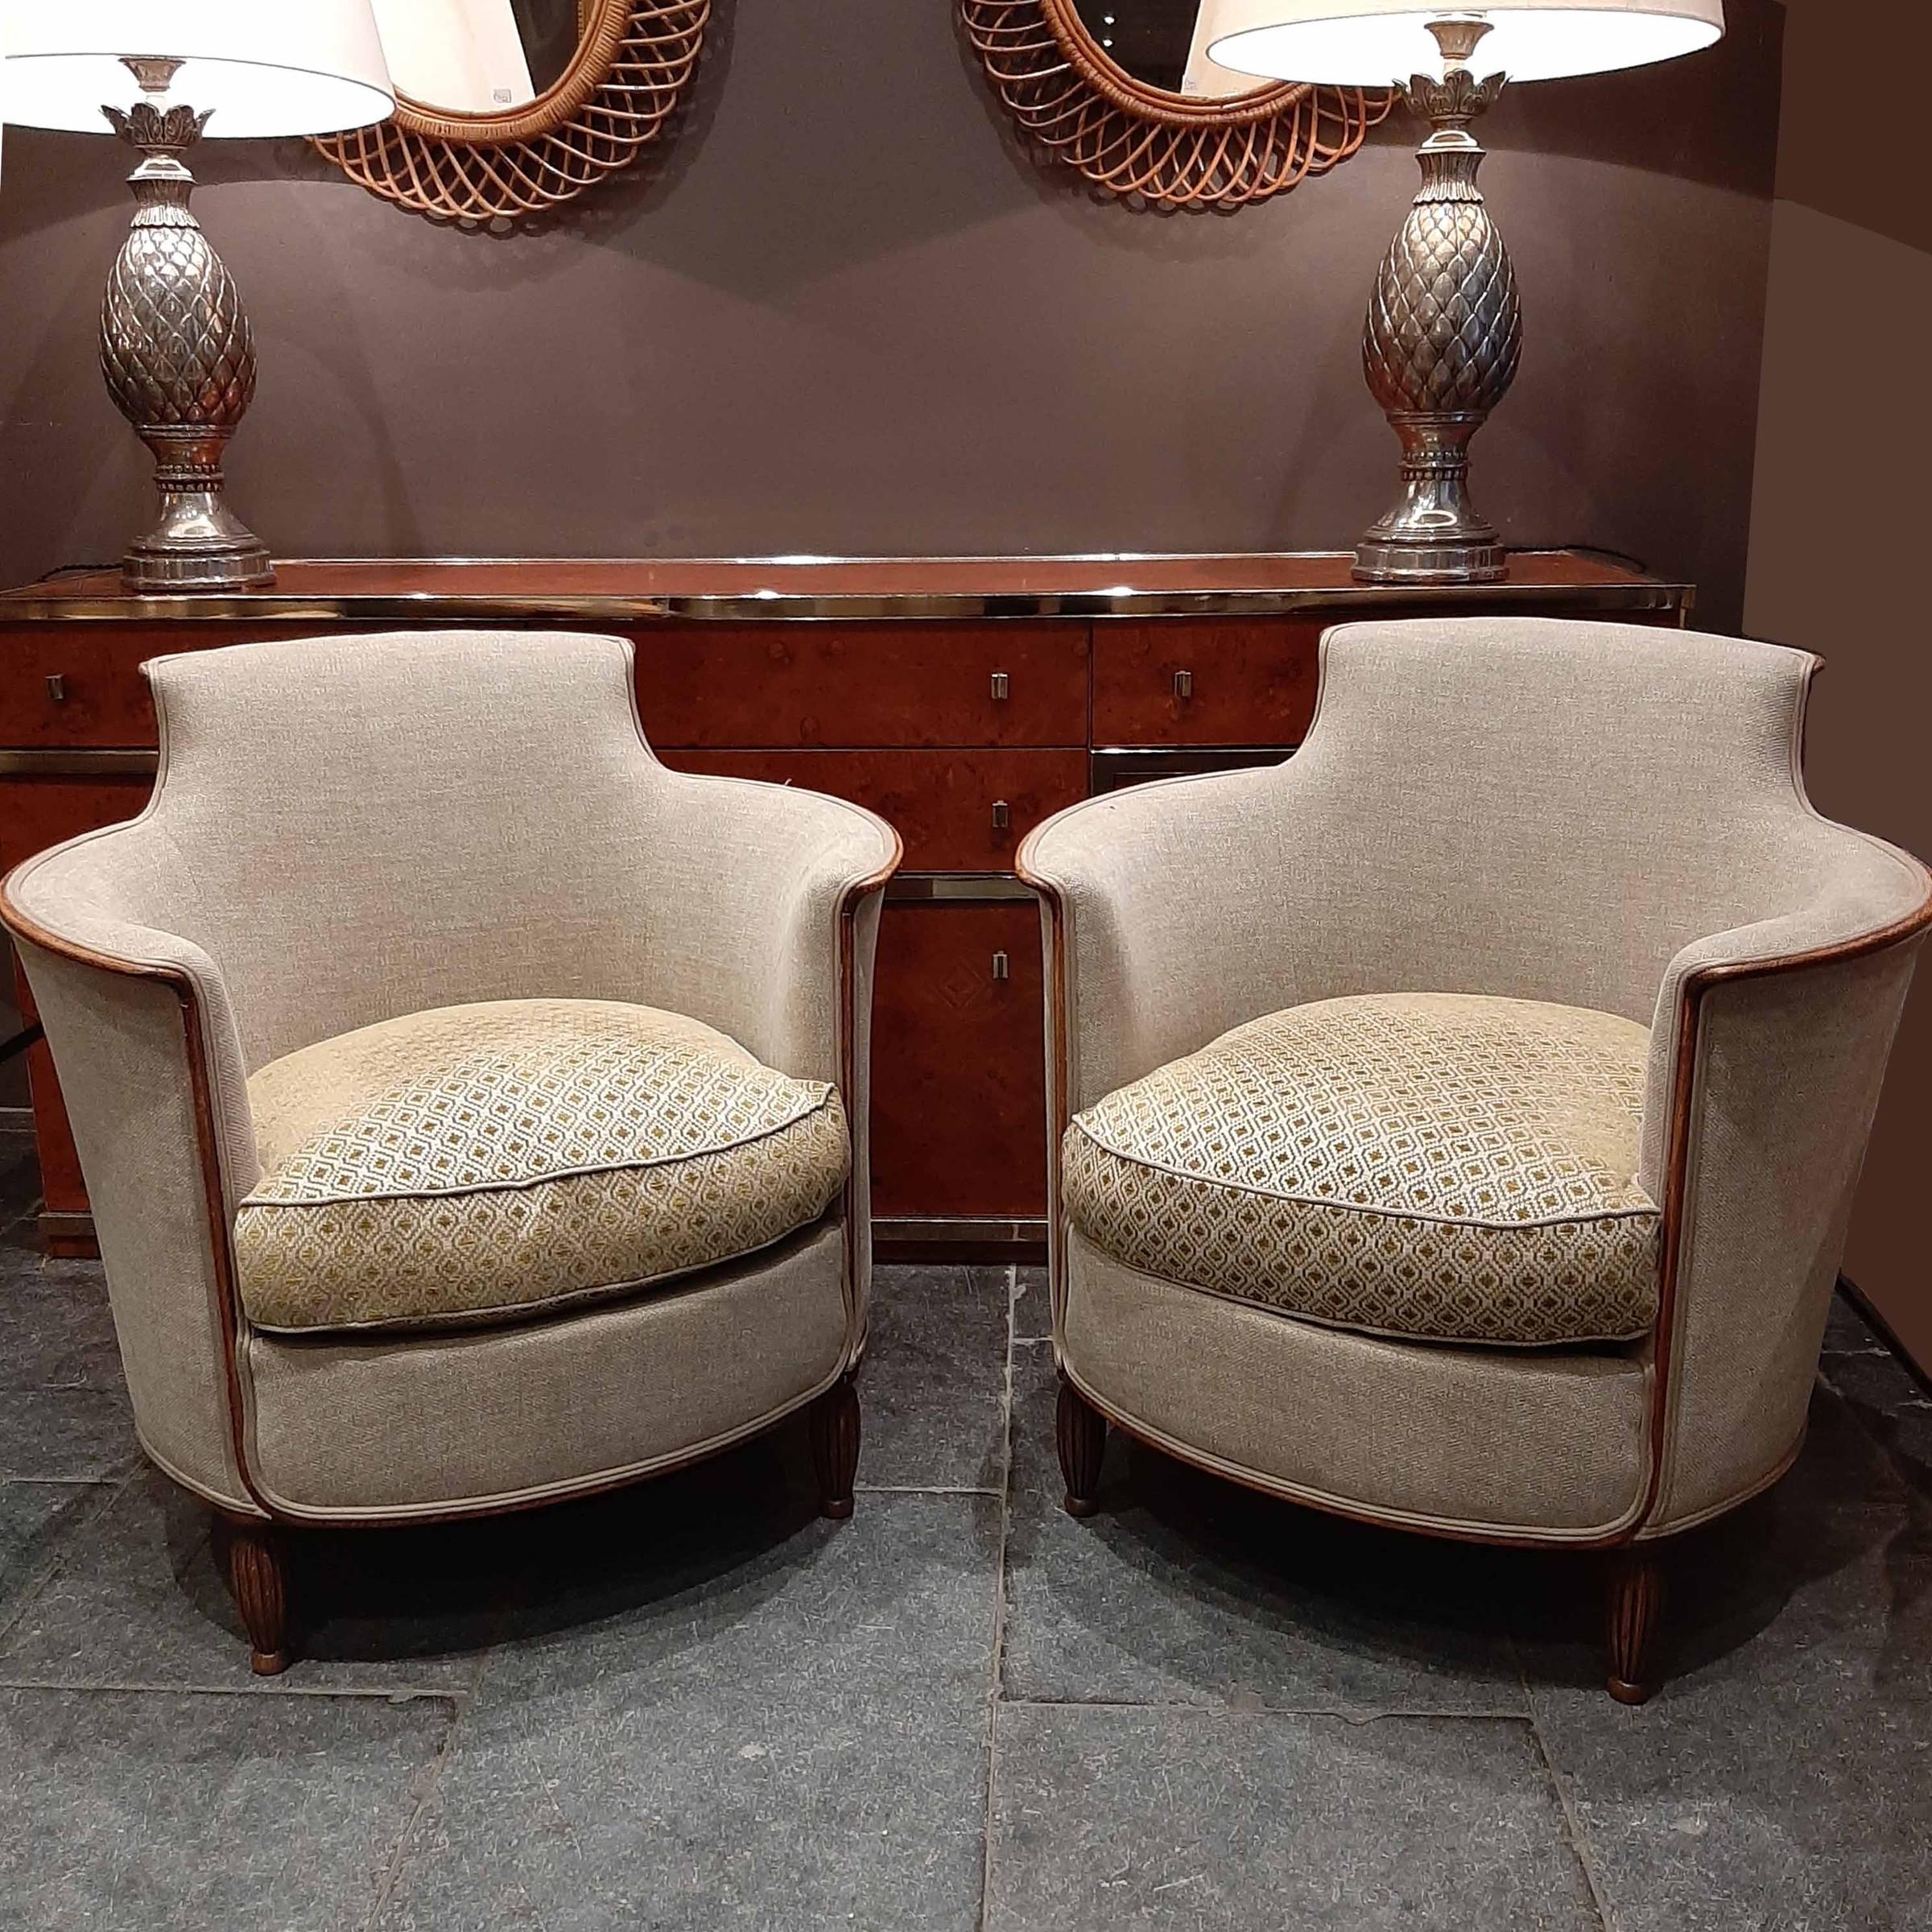 Pair of 1950s armchairs. These charming fifties chairs have a lovely round shape. They are re-upholstered in a new art deco style fabric in the color beige with green details. The legs and around the body of the chairs a lovely walnut wooden